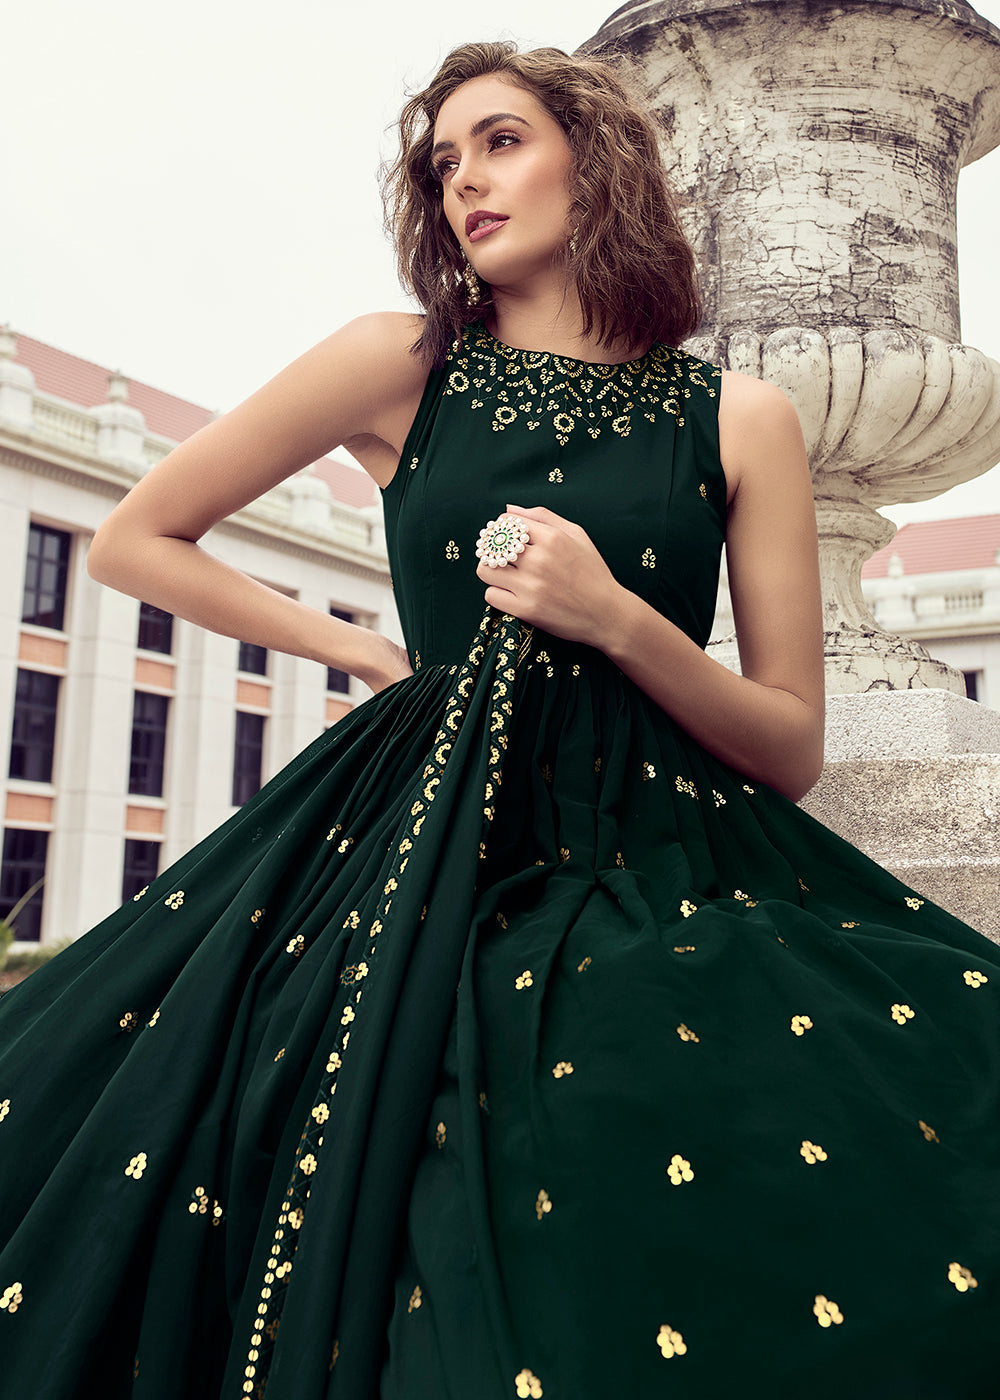 Buy Now Bottle Green Georgette Thread & Sequins Wedding Party Gown Online in USA, UK, Australia, New Zealand, Canada & Worldwide at Empress Clothing. 